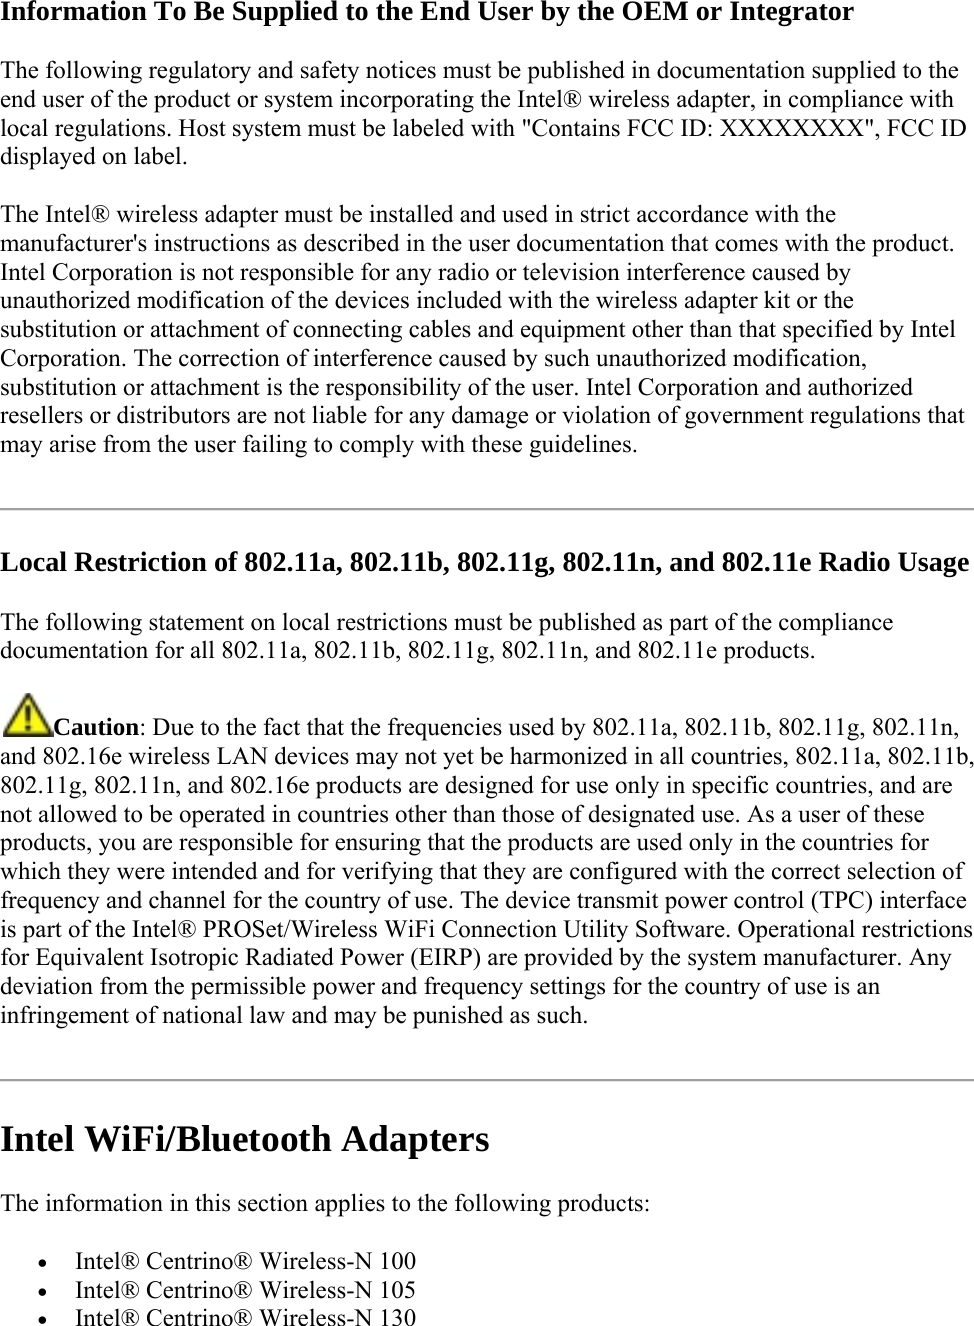 Information To Be Supplied to the End User by the OEM or Integrator The following regulatory and safety notices must be published in documentation supplied to the end user of the product or system incorporating the Intel® wireless adapter, in compliance with local regulations. Host system must be labeled with &quot;Contains FCC ID: XXXXXXXX&quot;, FCC ID displayed on label. The Intel® wireless adapter must be installed and used in strict accordance with the manufacturer&apos;s instructions as described in the user documentation that comes with the product. Intel Corporation is not responsible for any radio or television interference caused by unauthorized modification of the devices included with the wireless adapter kit or the substitution or attachment of connecting cables and equipment other than that specified by Intel Corporation. The correction of interference caused by such unauthorized modification, substitution or attachment is the responsibility of the user. Intel Corporation and authorized resellers or distributors are not liable for any damage or violation of government regulations that may arise from the user failing to comply with these guidelines.  Local Restriction of 802.11a, 802.11b, 802.11g, 802.11n, and 802.11e Radio Usage The following statement on local restrictions must be published as part of the compliance documentation for all 802.11a, 802.11b, 802.11g, 802.11n, and 802.11e products.  Caution: Due to the fact that the frequencies used by 802.11a, 802.11b, 802.11g, 802.11n, and 802.16e wireless LAN devices may not yet be harmonized in all countries, 802.11a, 802.11b, 802.11g, 802.11n, and 802.16e products are designed for use only in specific countries, and are not allowed to be operated in countries other than those of designated use. As a user of these products, you are responsible for ensuring that the products are used only in the countries for which they were intended and for verifying that they are configured with the correct selection of frequency and channel for the country of use. The device transmit power control (TPC) interface is part of the Intel® PROSet/Wireless WiFi Connection Utility Software. Operational restrictions for Equivalent Isotropic Radiated Power (EIRP) are provided by the system manufacturer. Any deviation from the permissible power and frequency settings for the country of use is an infringement of national law and may be punished as such.   Intel WiFi/Bluetooth Adapters The information in this section applies to the following products:  Intel® Centrino® Wireless-N 100   Intel® Centrino® Wireless-N 105  Intel® Centrino® Wireless-N 130 